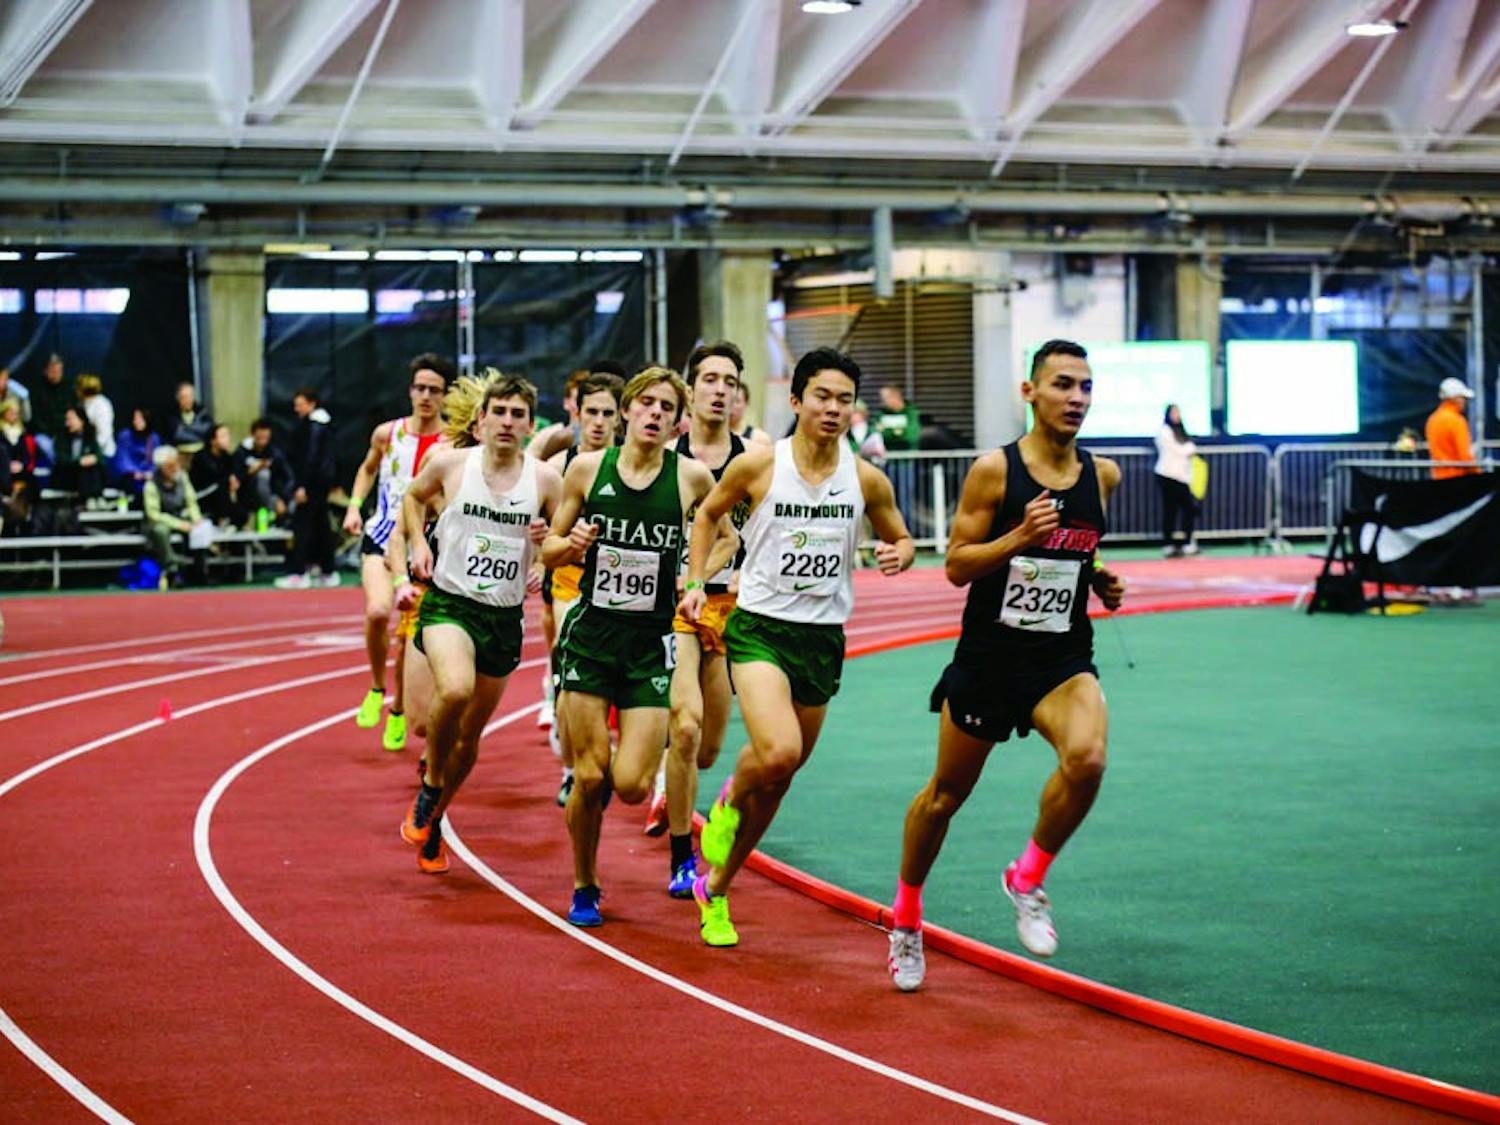 Dartmouth track and field athletes competed in a variety of events at the Dartmouth Relays this weekend.